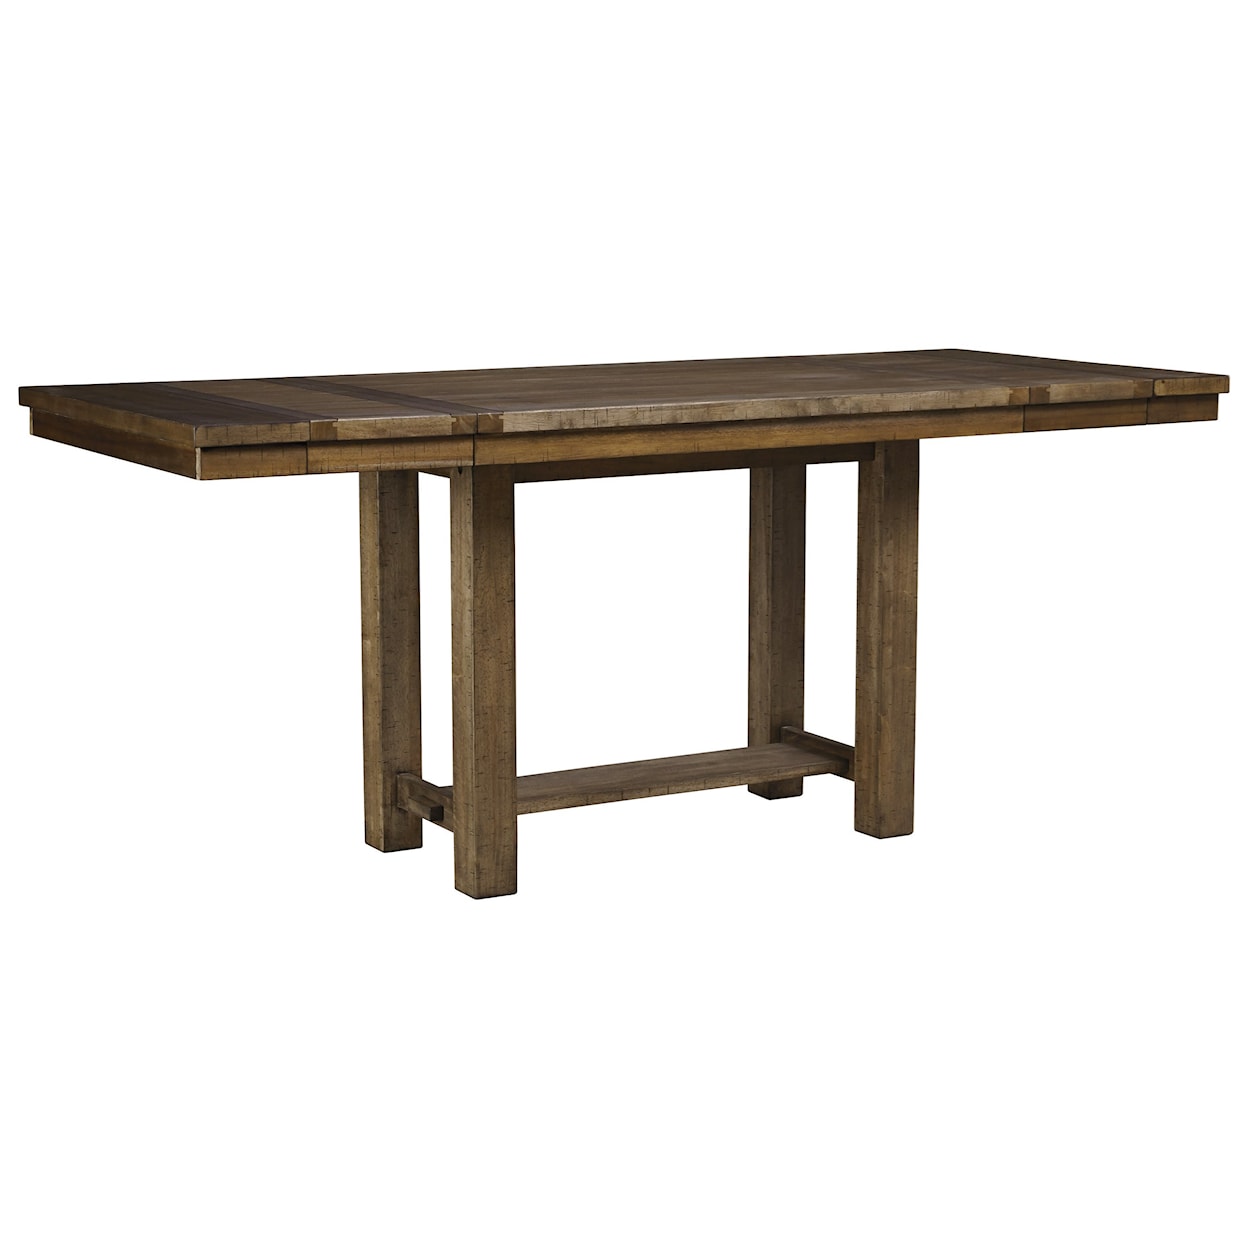 Benchcraft Moriville Rect. Dining Room Counter Extension Table